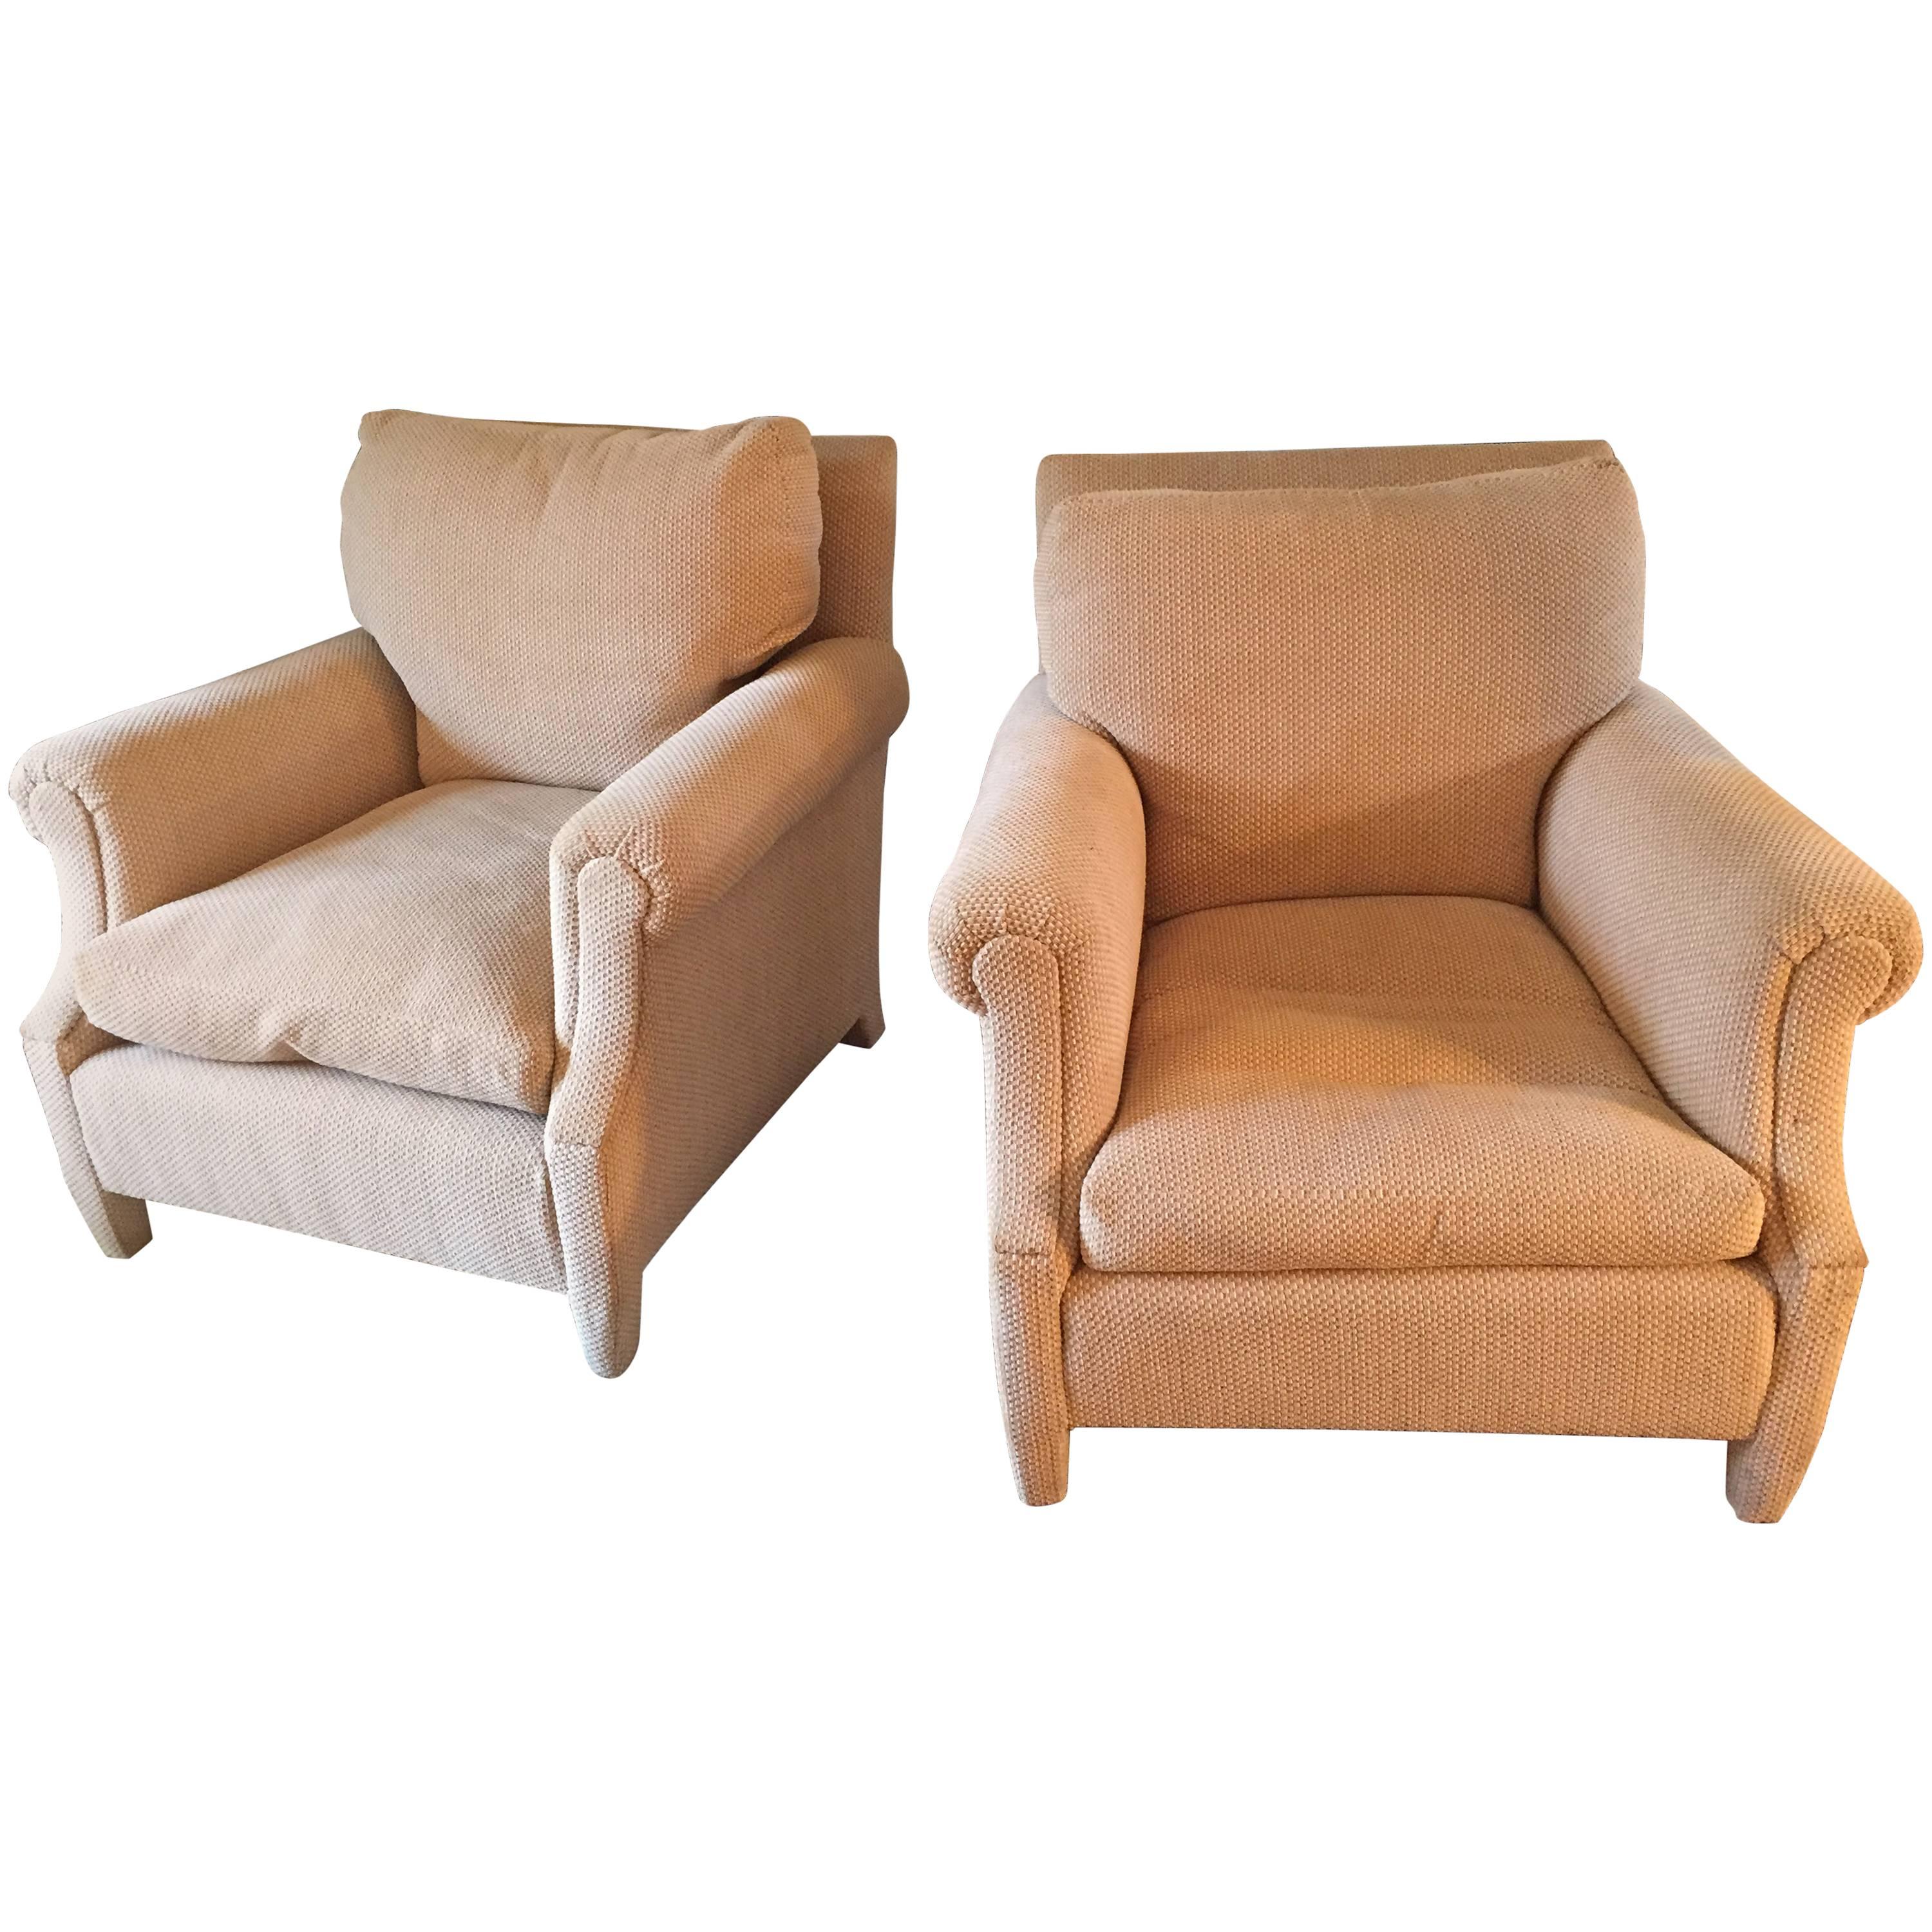 Pair of Club Chairs Attributed to Maison Jansen